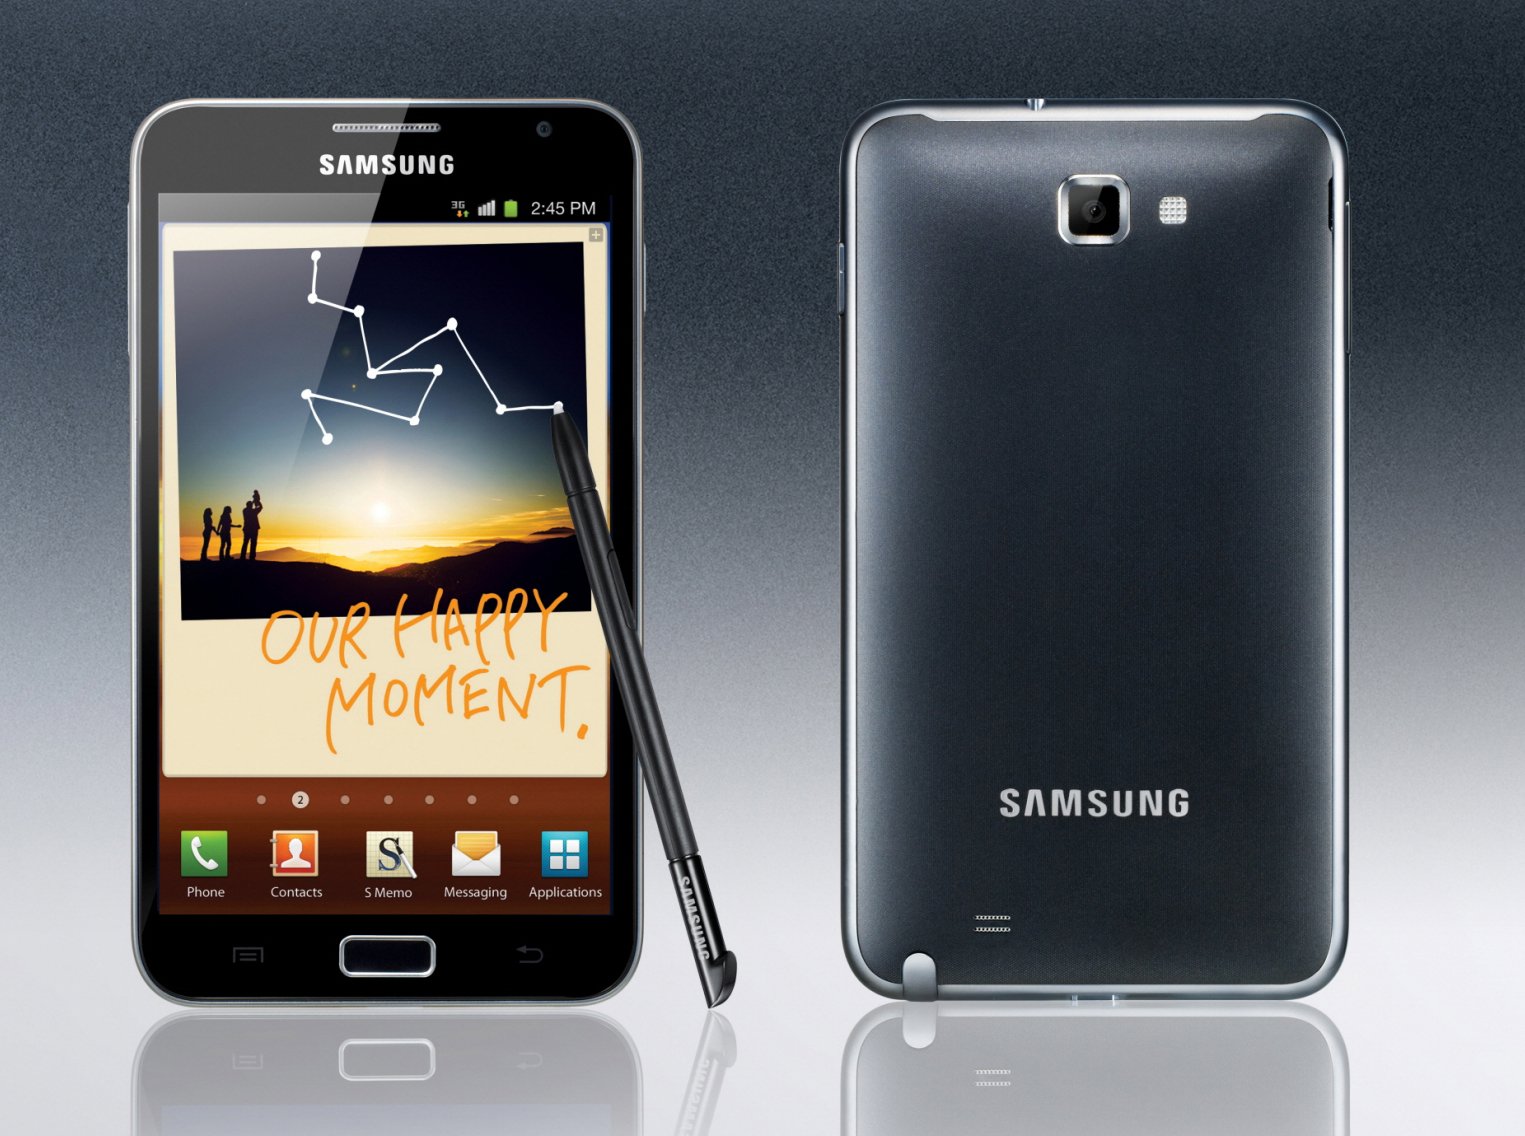 Samsung Galaxy Note N7000 specs, review, release date - PhonesData